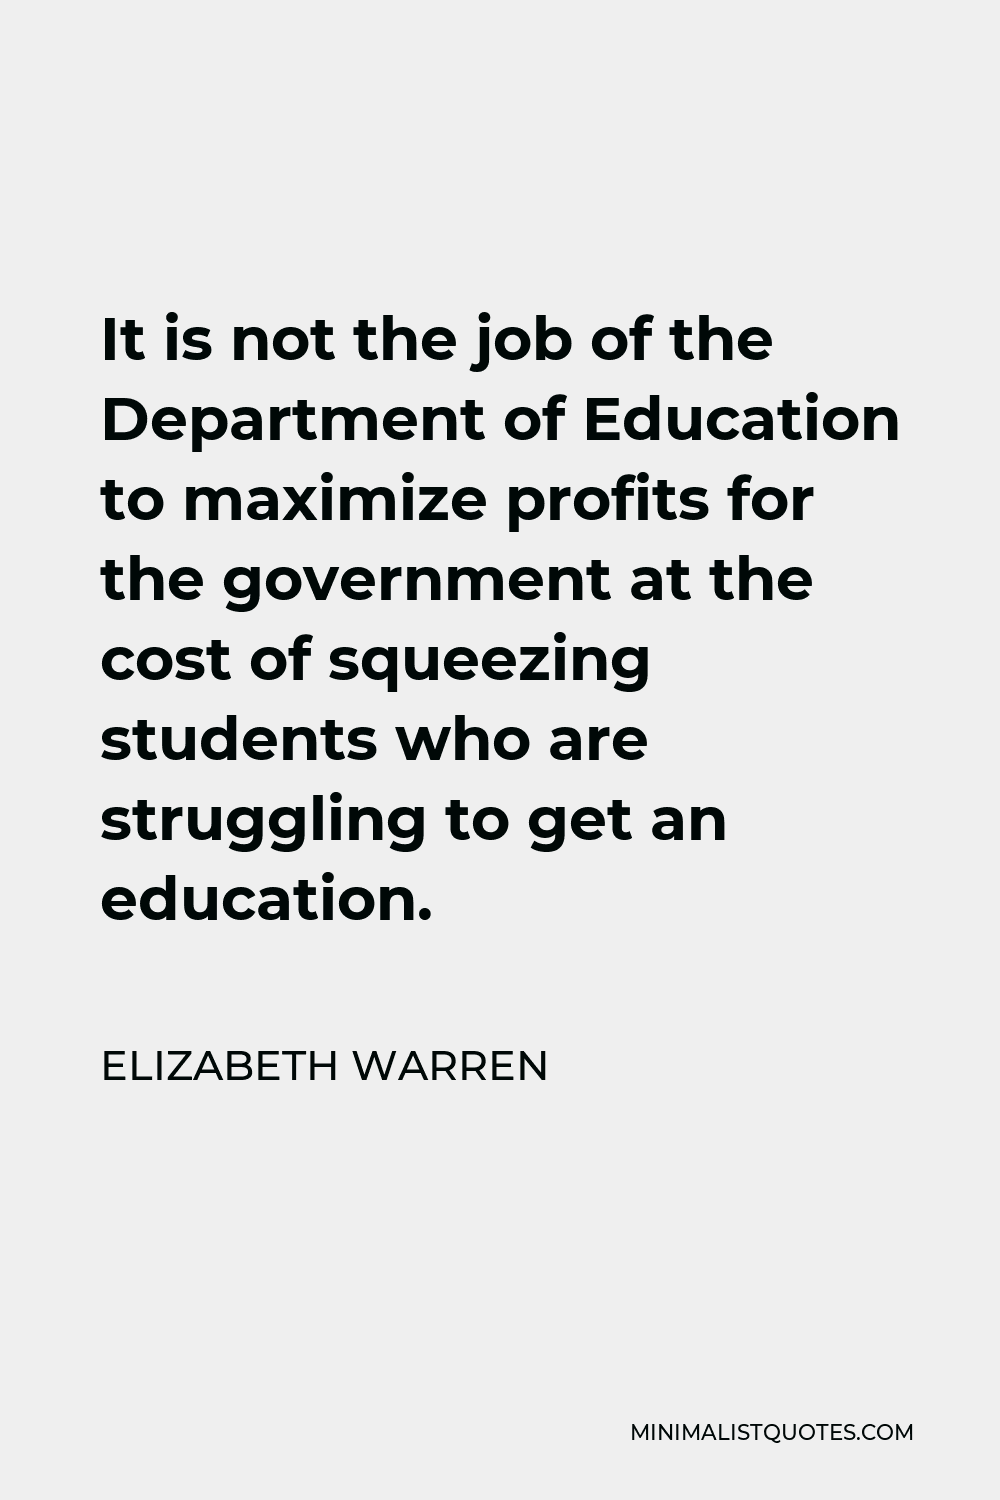 Elizabeth Warren Quote - It is not the job of the Department of Education to maximize profits for the government at the cost of squeezing students who are struggling to get an education.